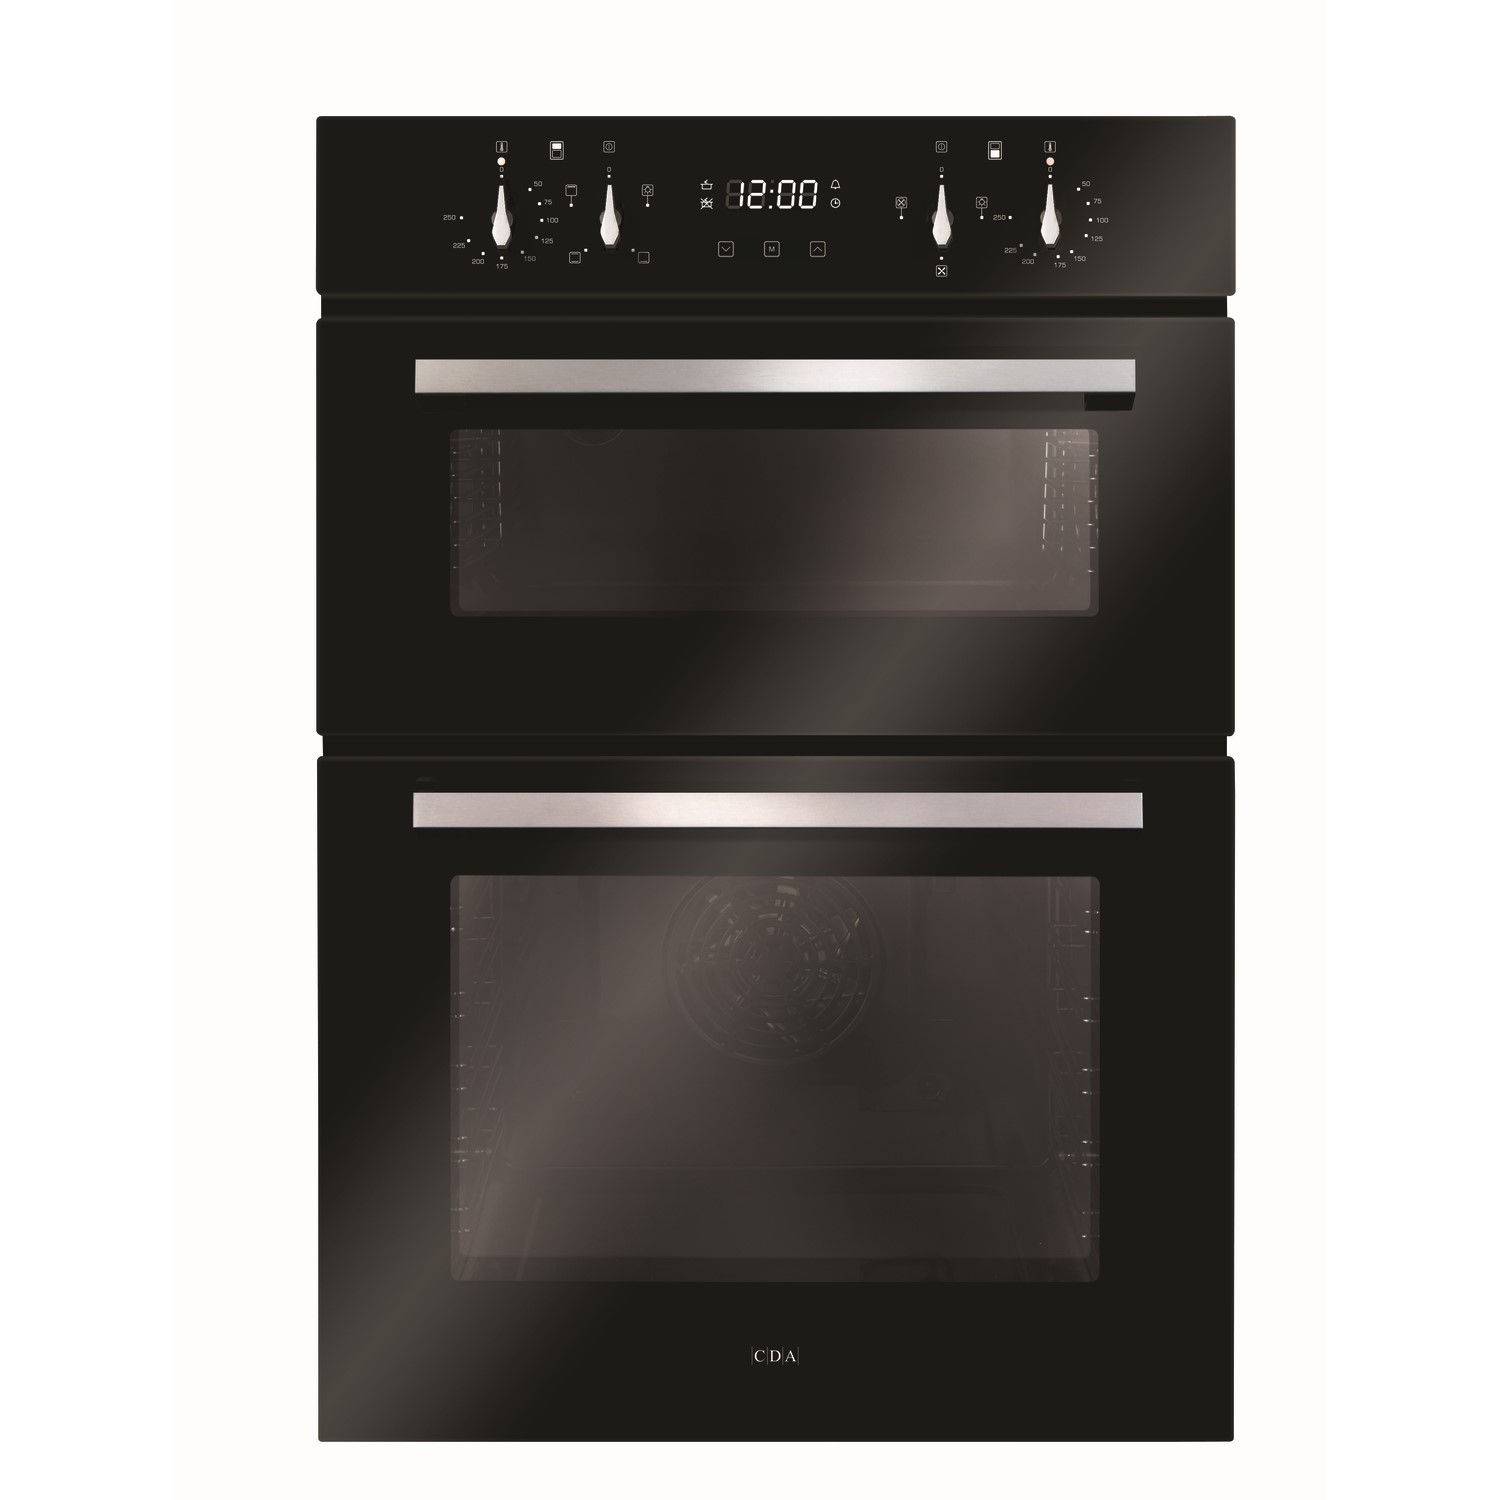 Photos - Oven CDA Built-In Electric Double  - Black DC941BL 